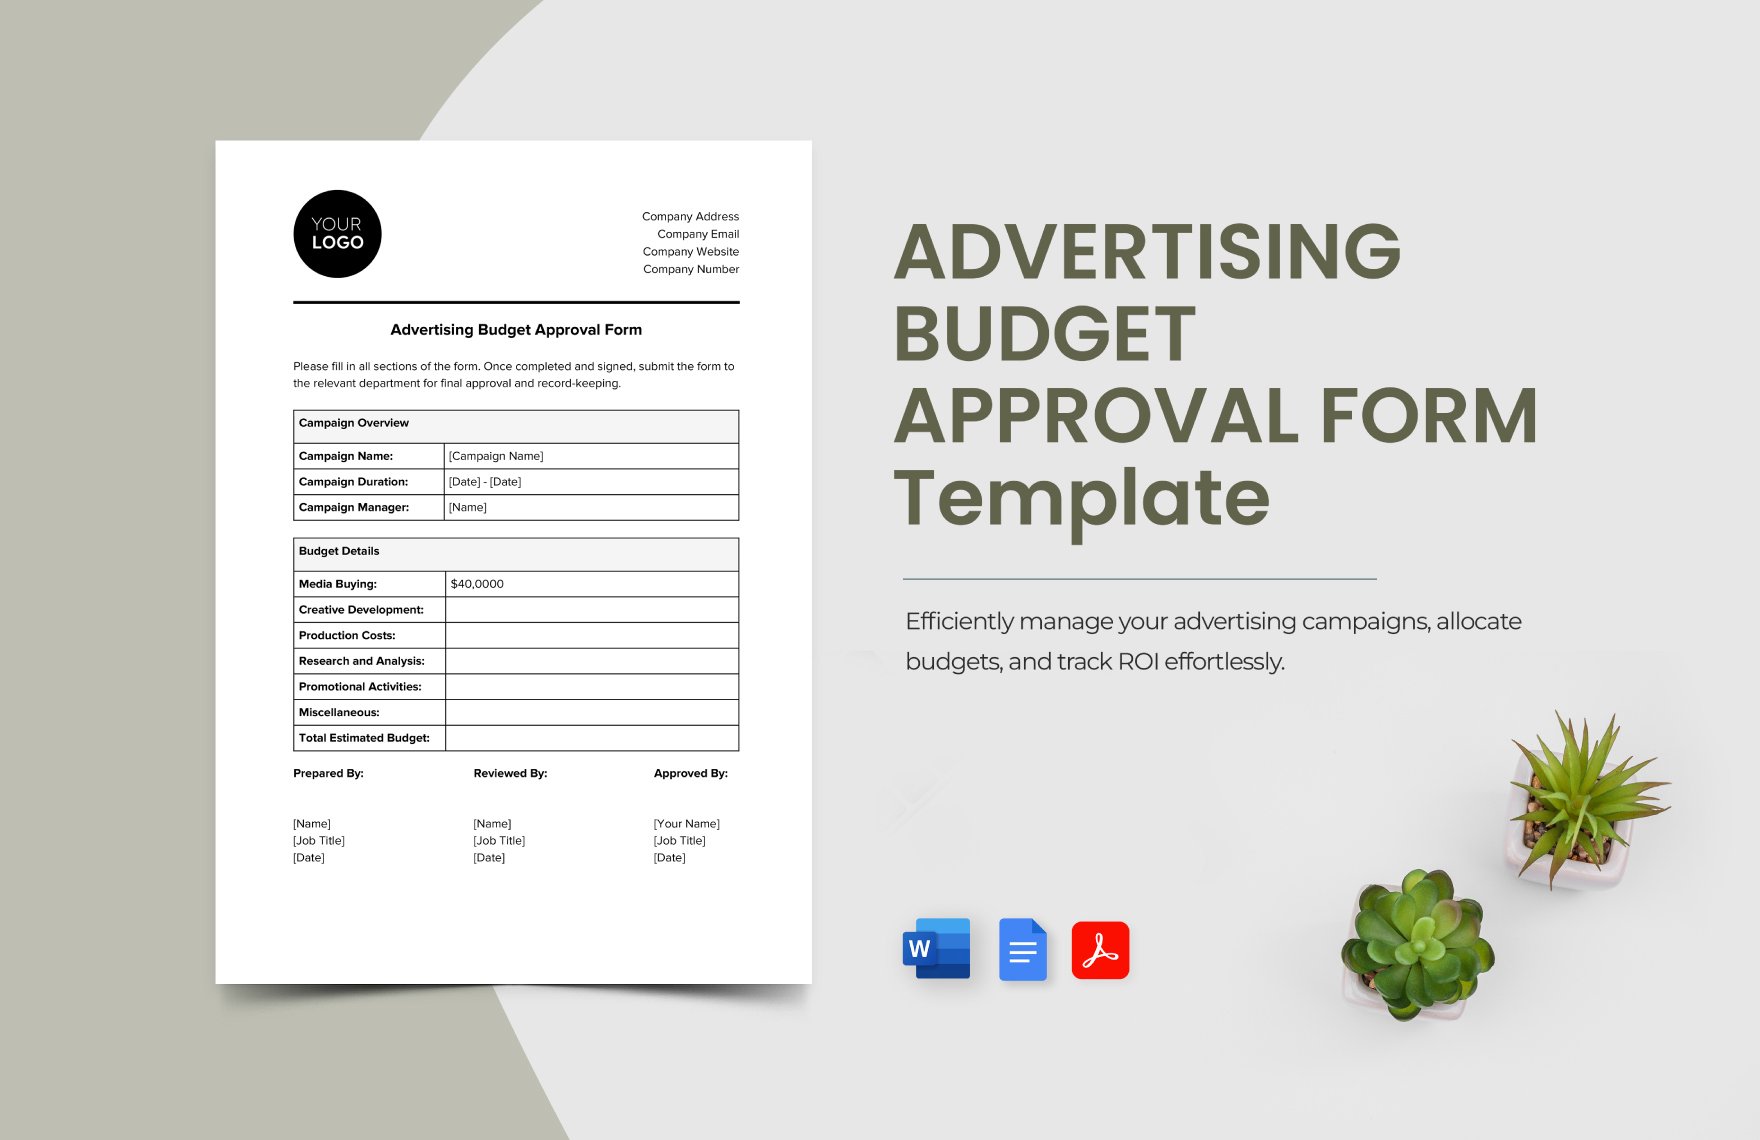 Advertising Budget Approval Form Template in Word, Google Docs, PDF